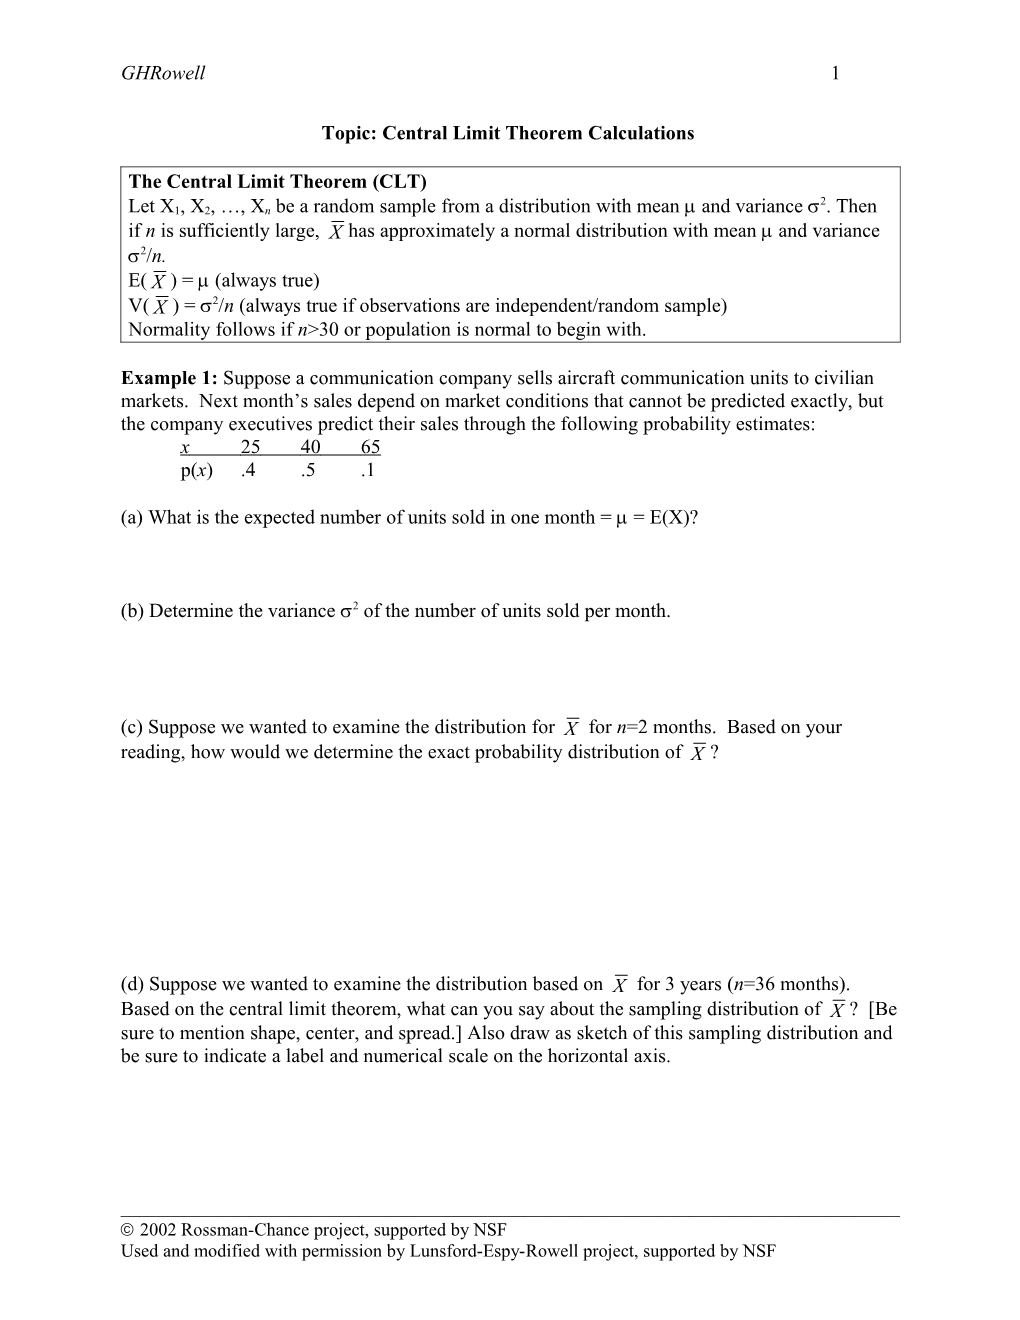 Topic: Central Limit Theorem Calculations